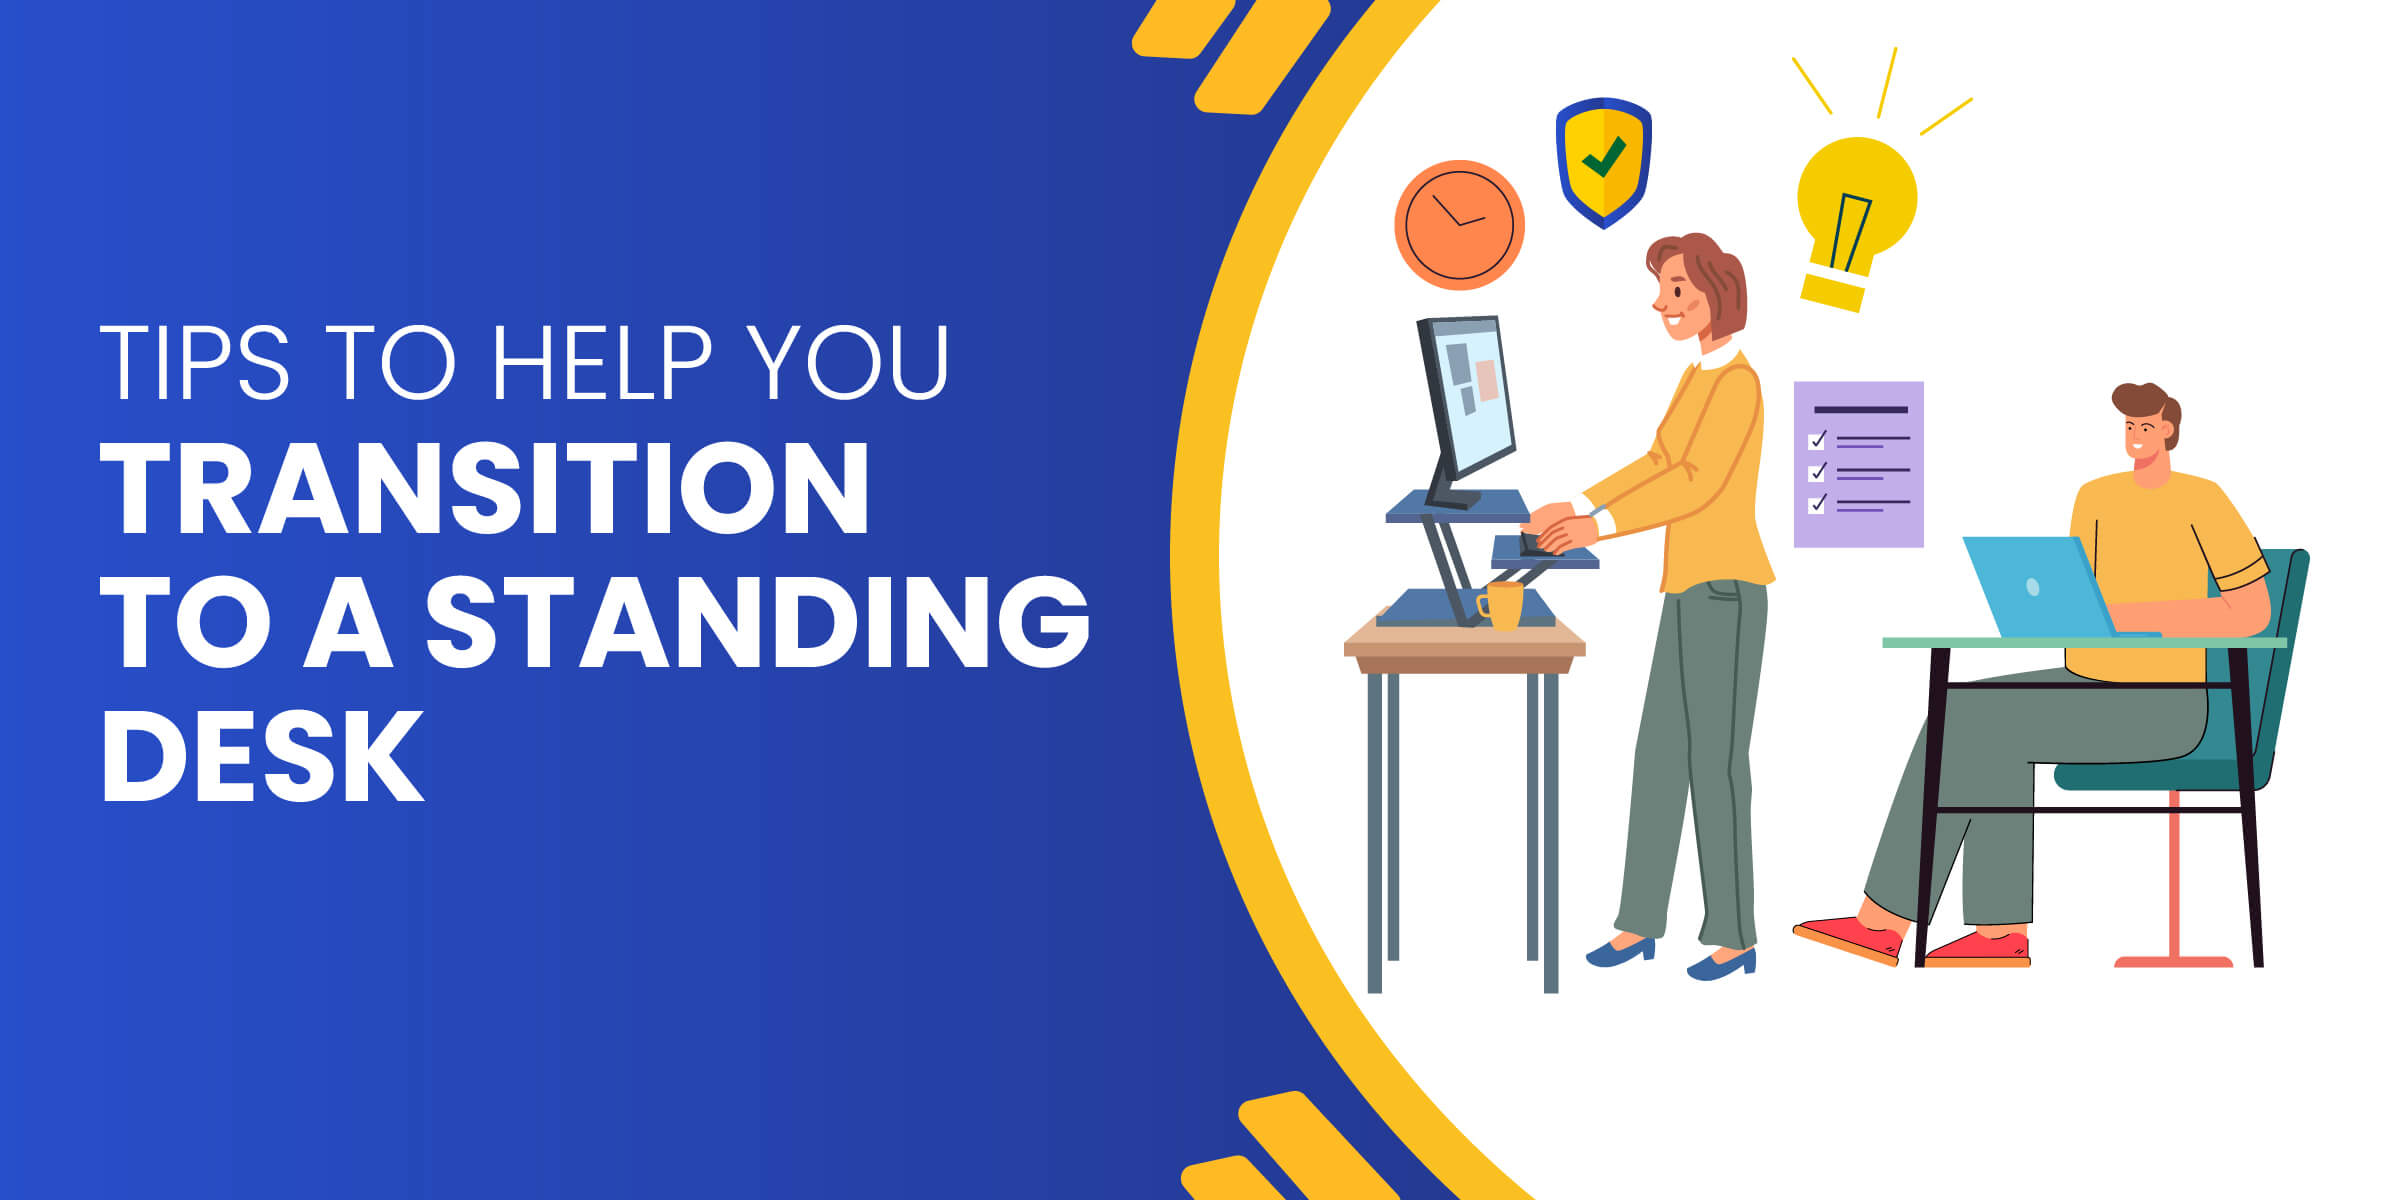 Tips to Help You Transition to Standing Desk